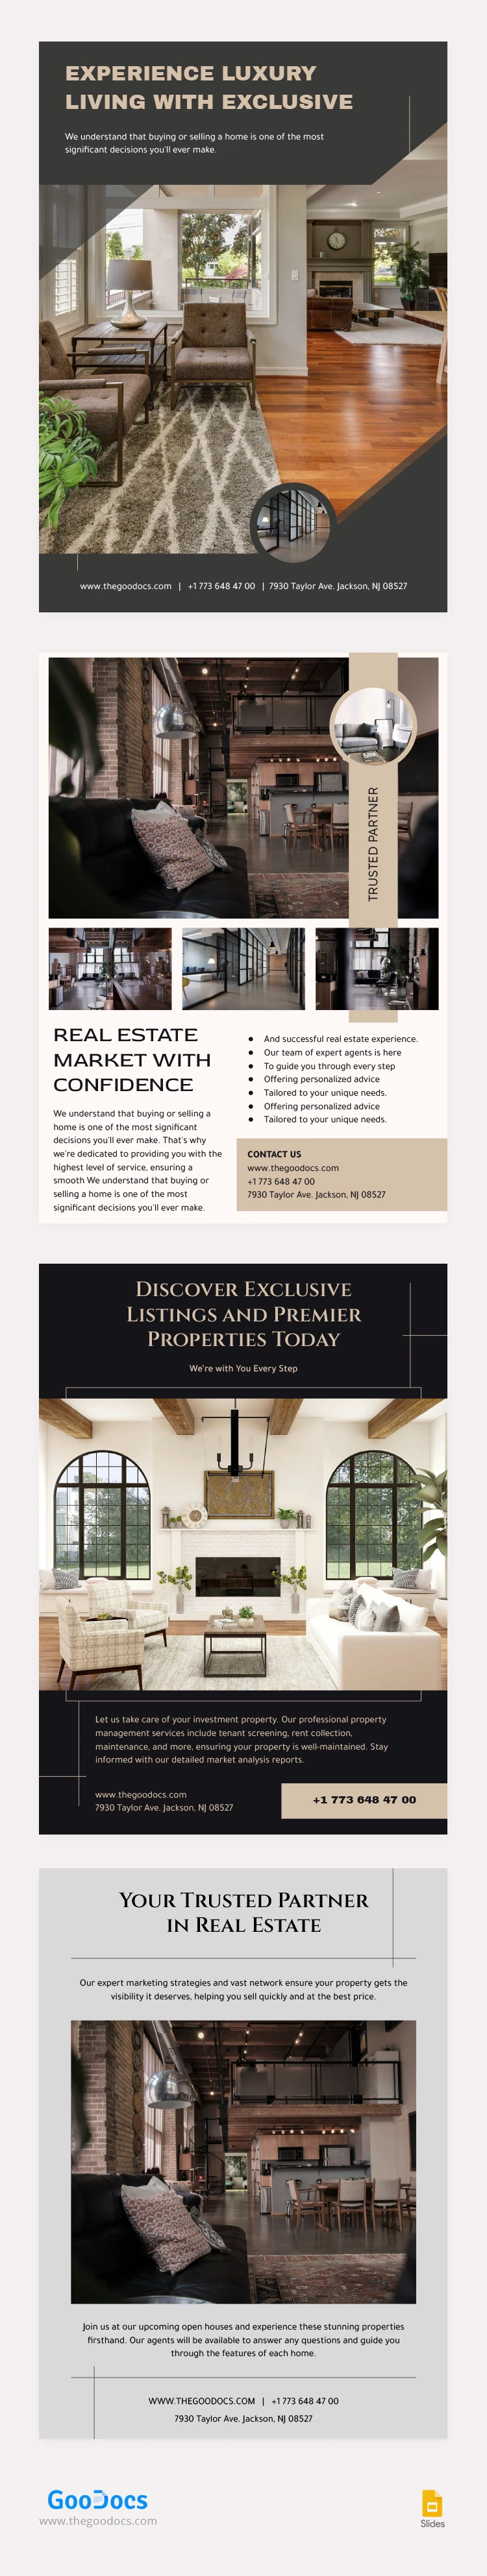 Real Estate Flyers - free Google Docs Template - 10068731